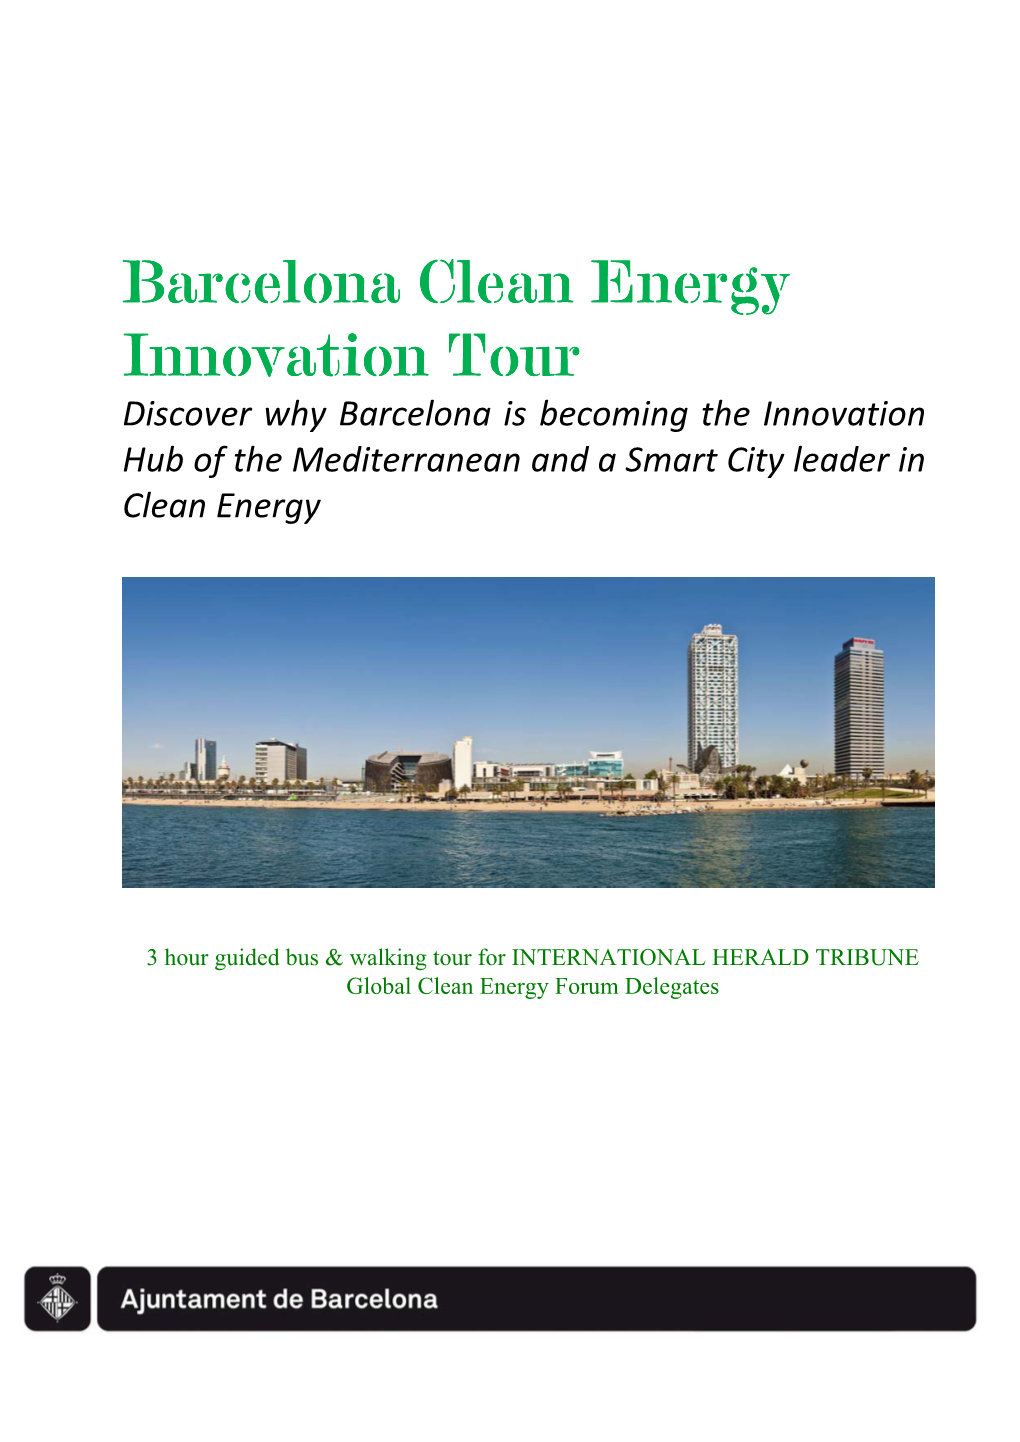 Barcelona Clean Energy Innovation Tour Proposal for IHT Final